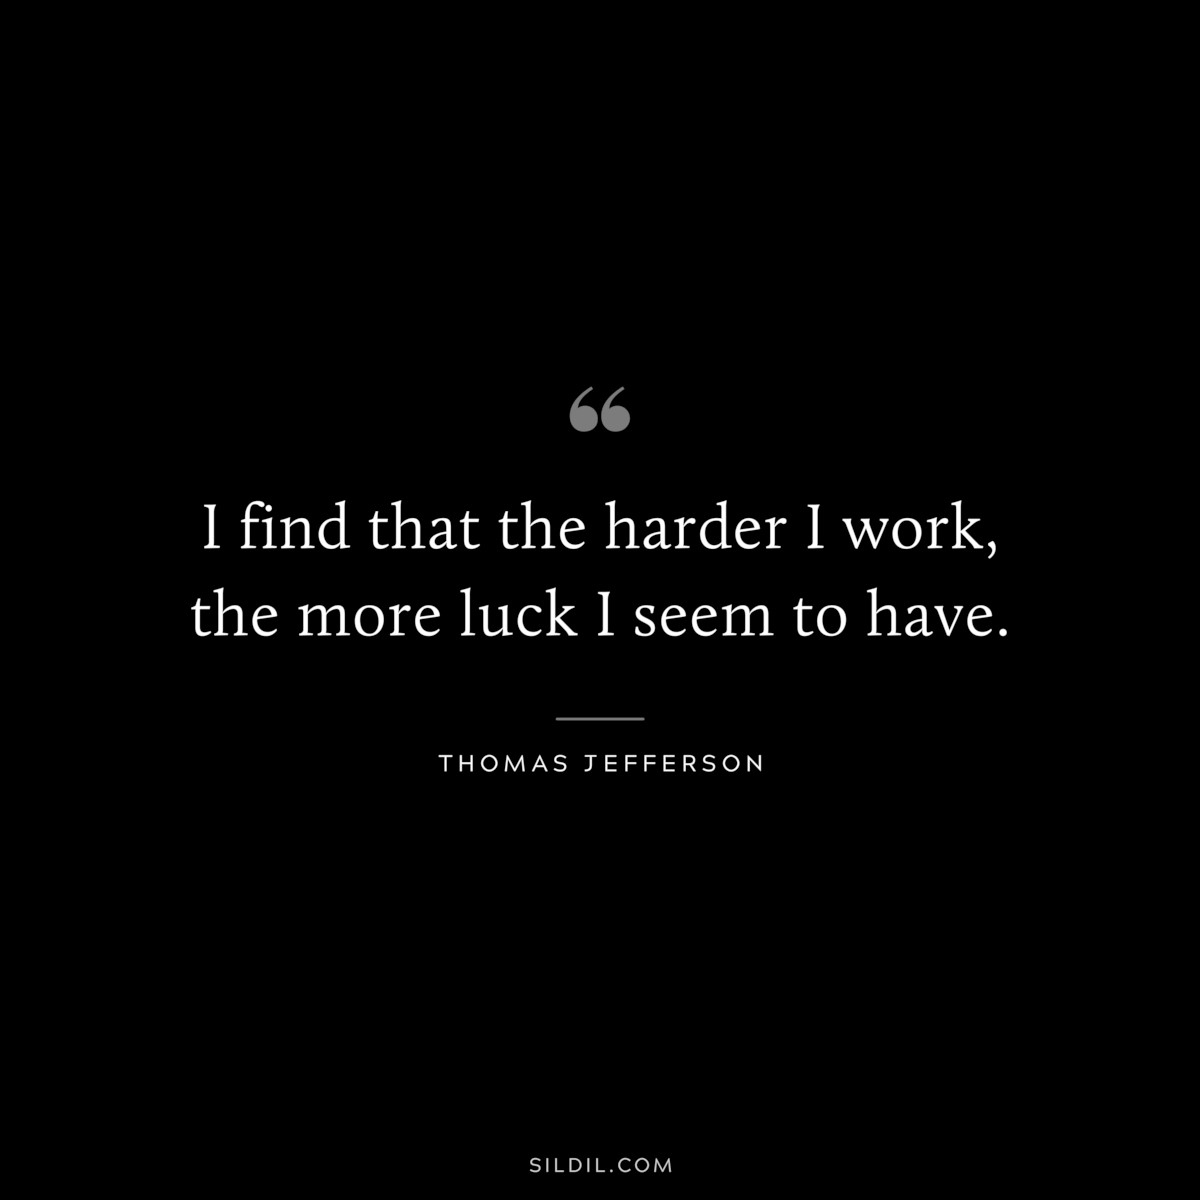 I find that the harder I work, the more luck I seem to have. ― Thomas Jefferson